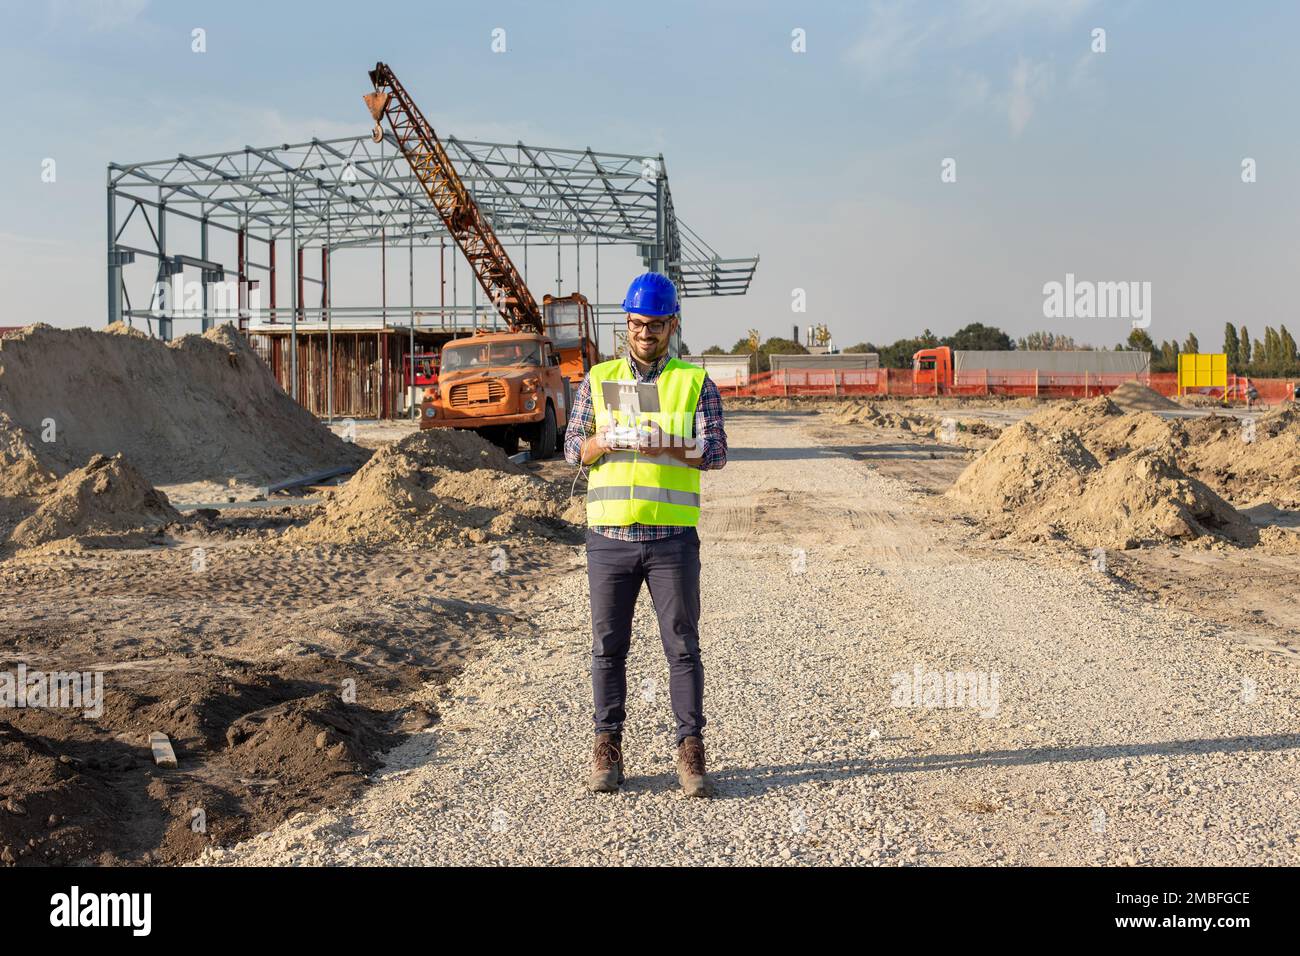 Engineer with helmet and vest operating with drone by remote control. Technology innovations in construction industry Stock Photo